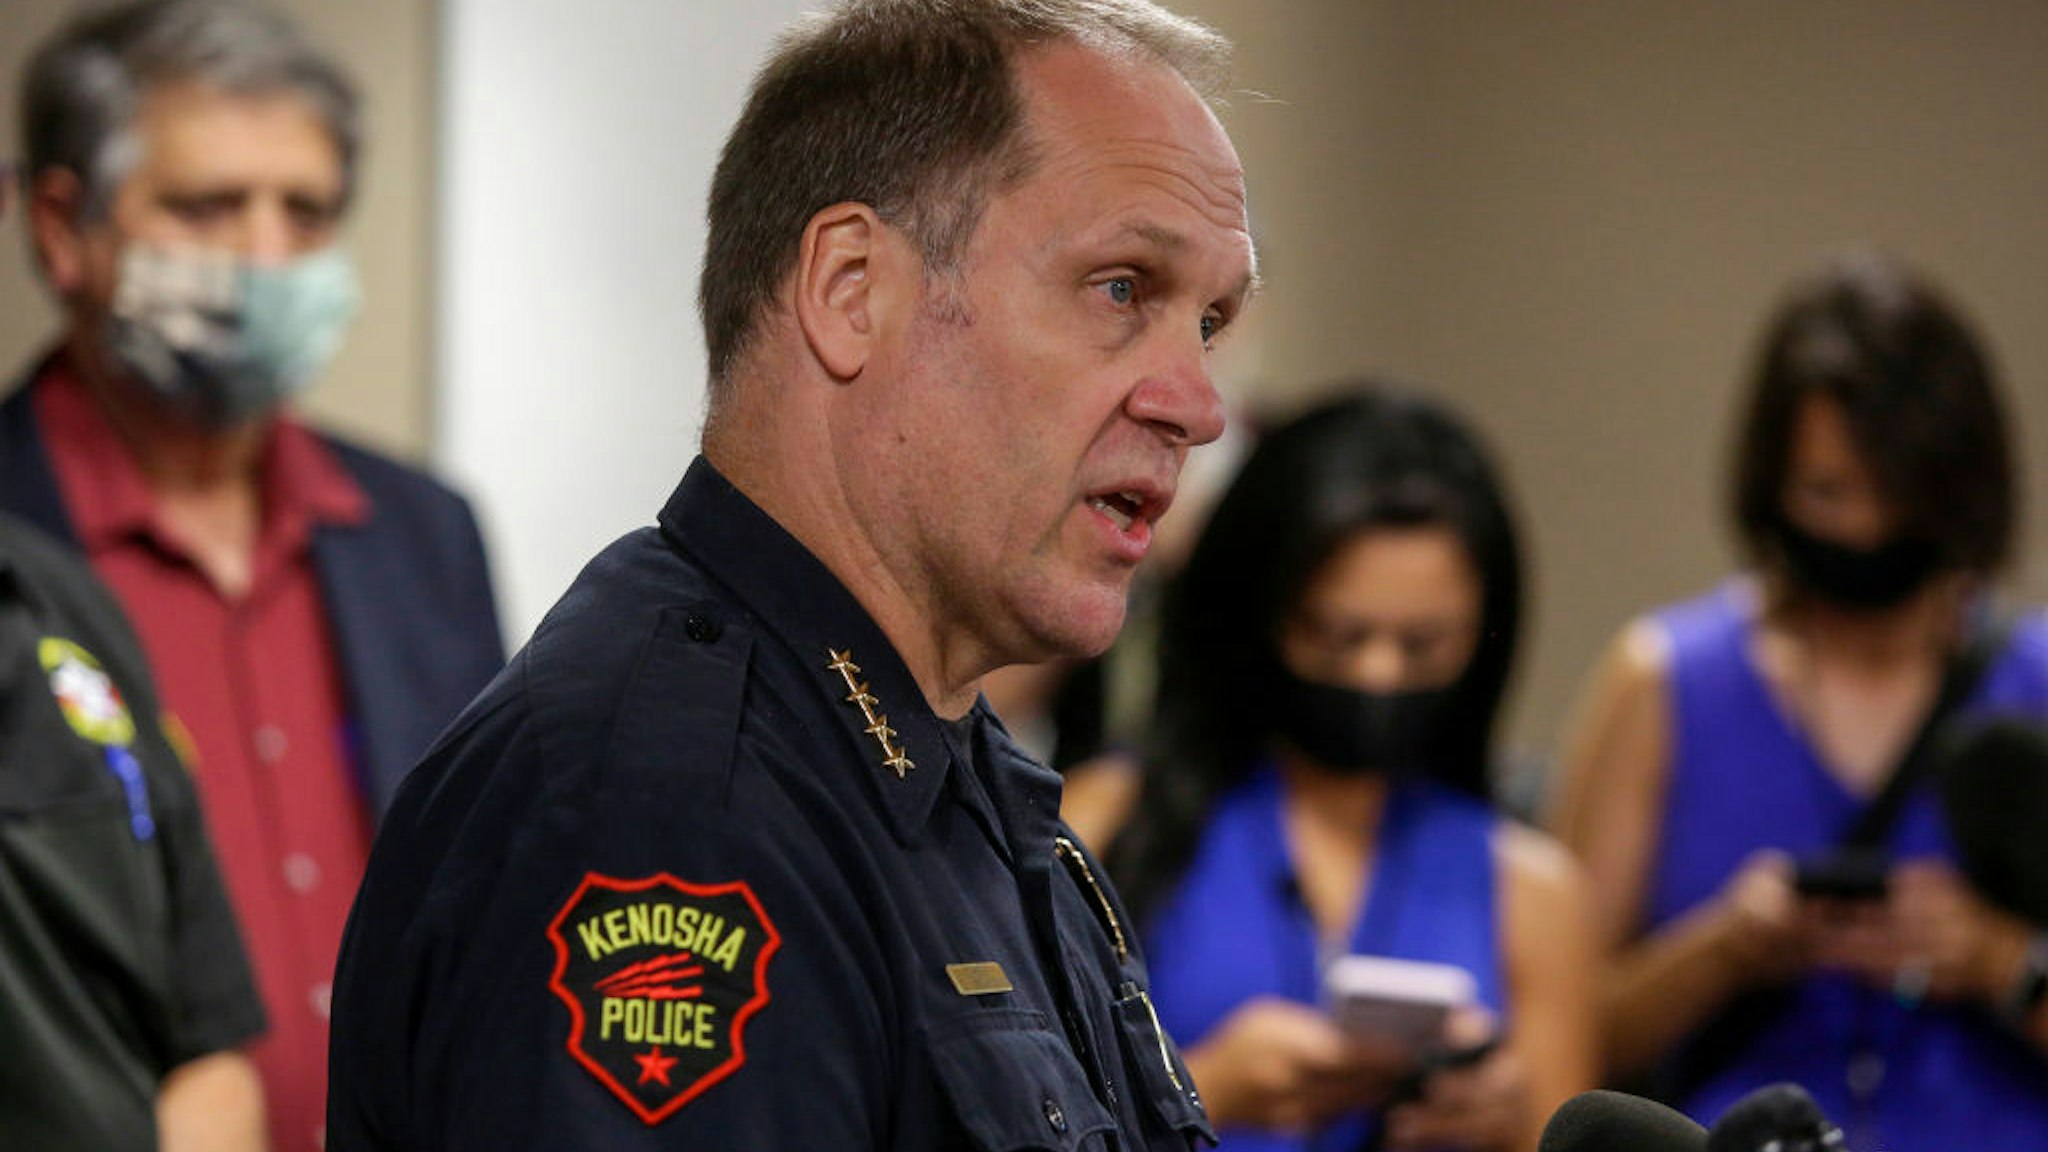 ENOSHA, WI - AUGUST 26: Kenosha Police Chief Daniel Miskinis speaks during a news conference at the Kenosha County Public Safety Building on Wednesday, August 26, 2020 in Kenosha, Wisconsin. Miskinis spoke about the recent looting, the fatal protest shooting and Jacob Blake, who was shot in the back multiple times by police officers who were responding to a domestic dispute call Sunday. Photo by Joshua Lott for The Washington Post via Getty Images